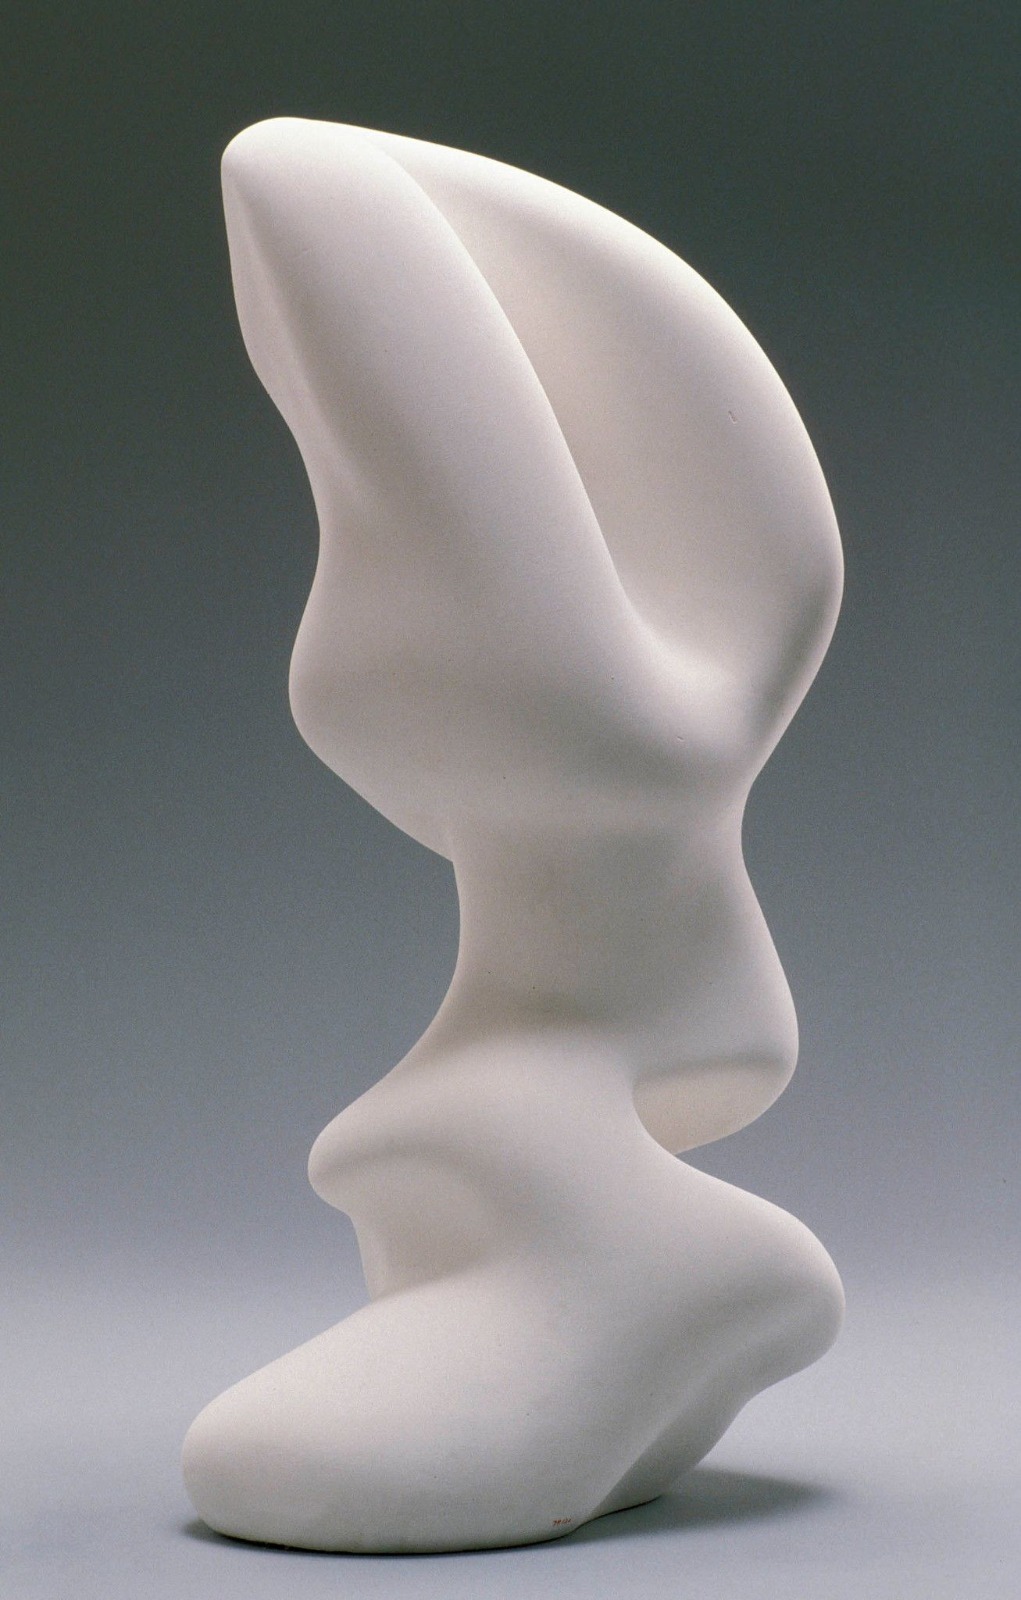 image or photo about Jean Arp